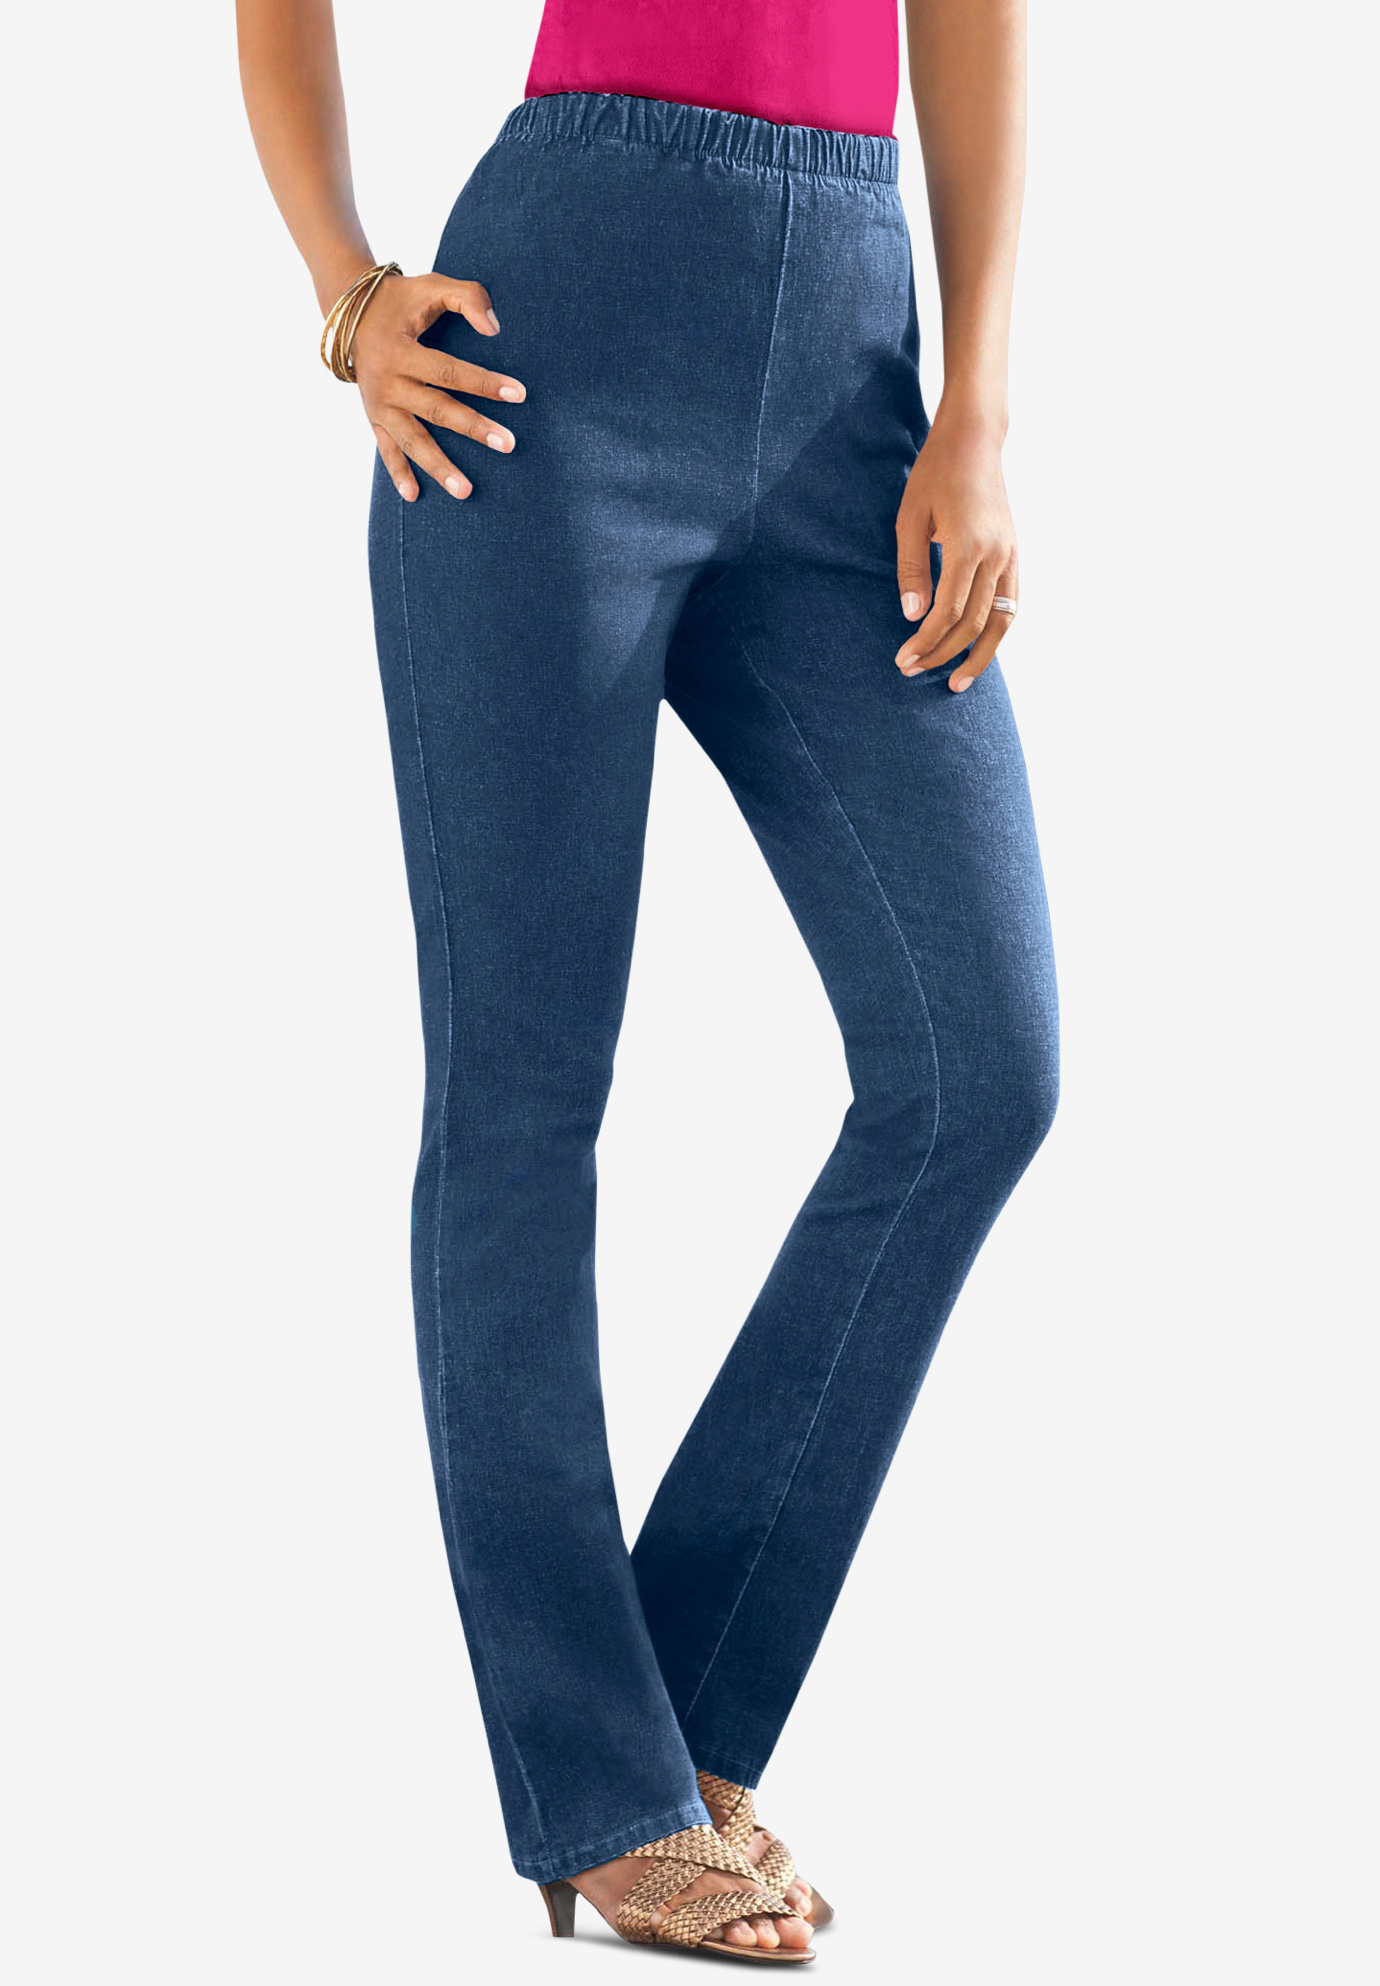 Roamans Womens Plus Size Petite Straight-Leg Jean with Invisible Stretch 